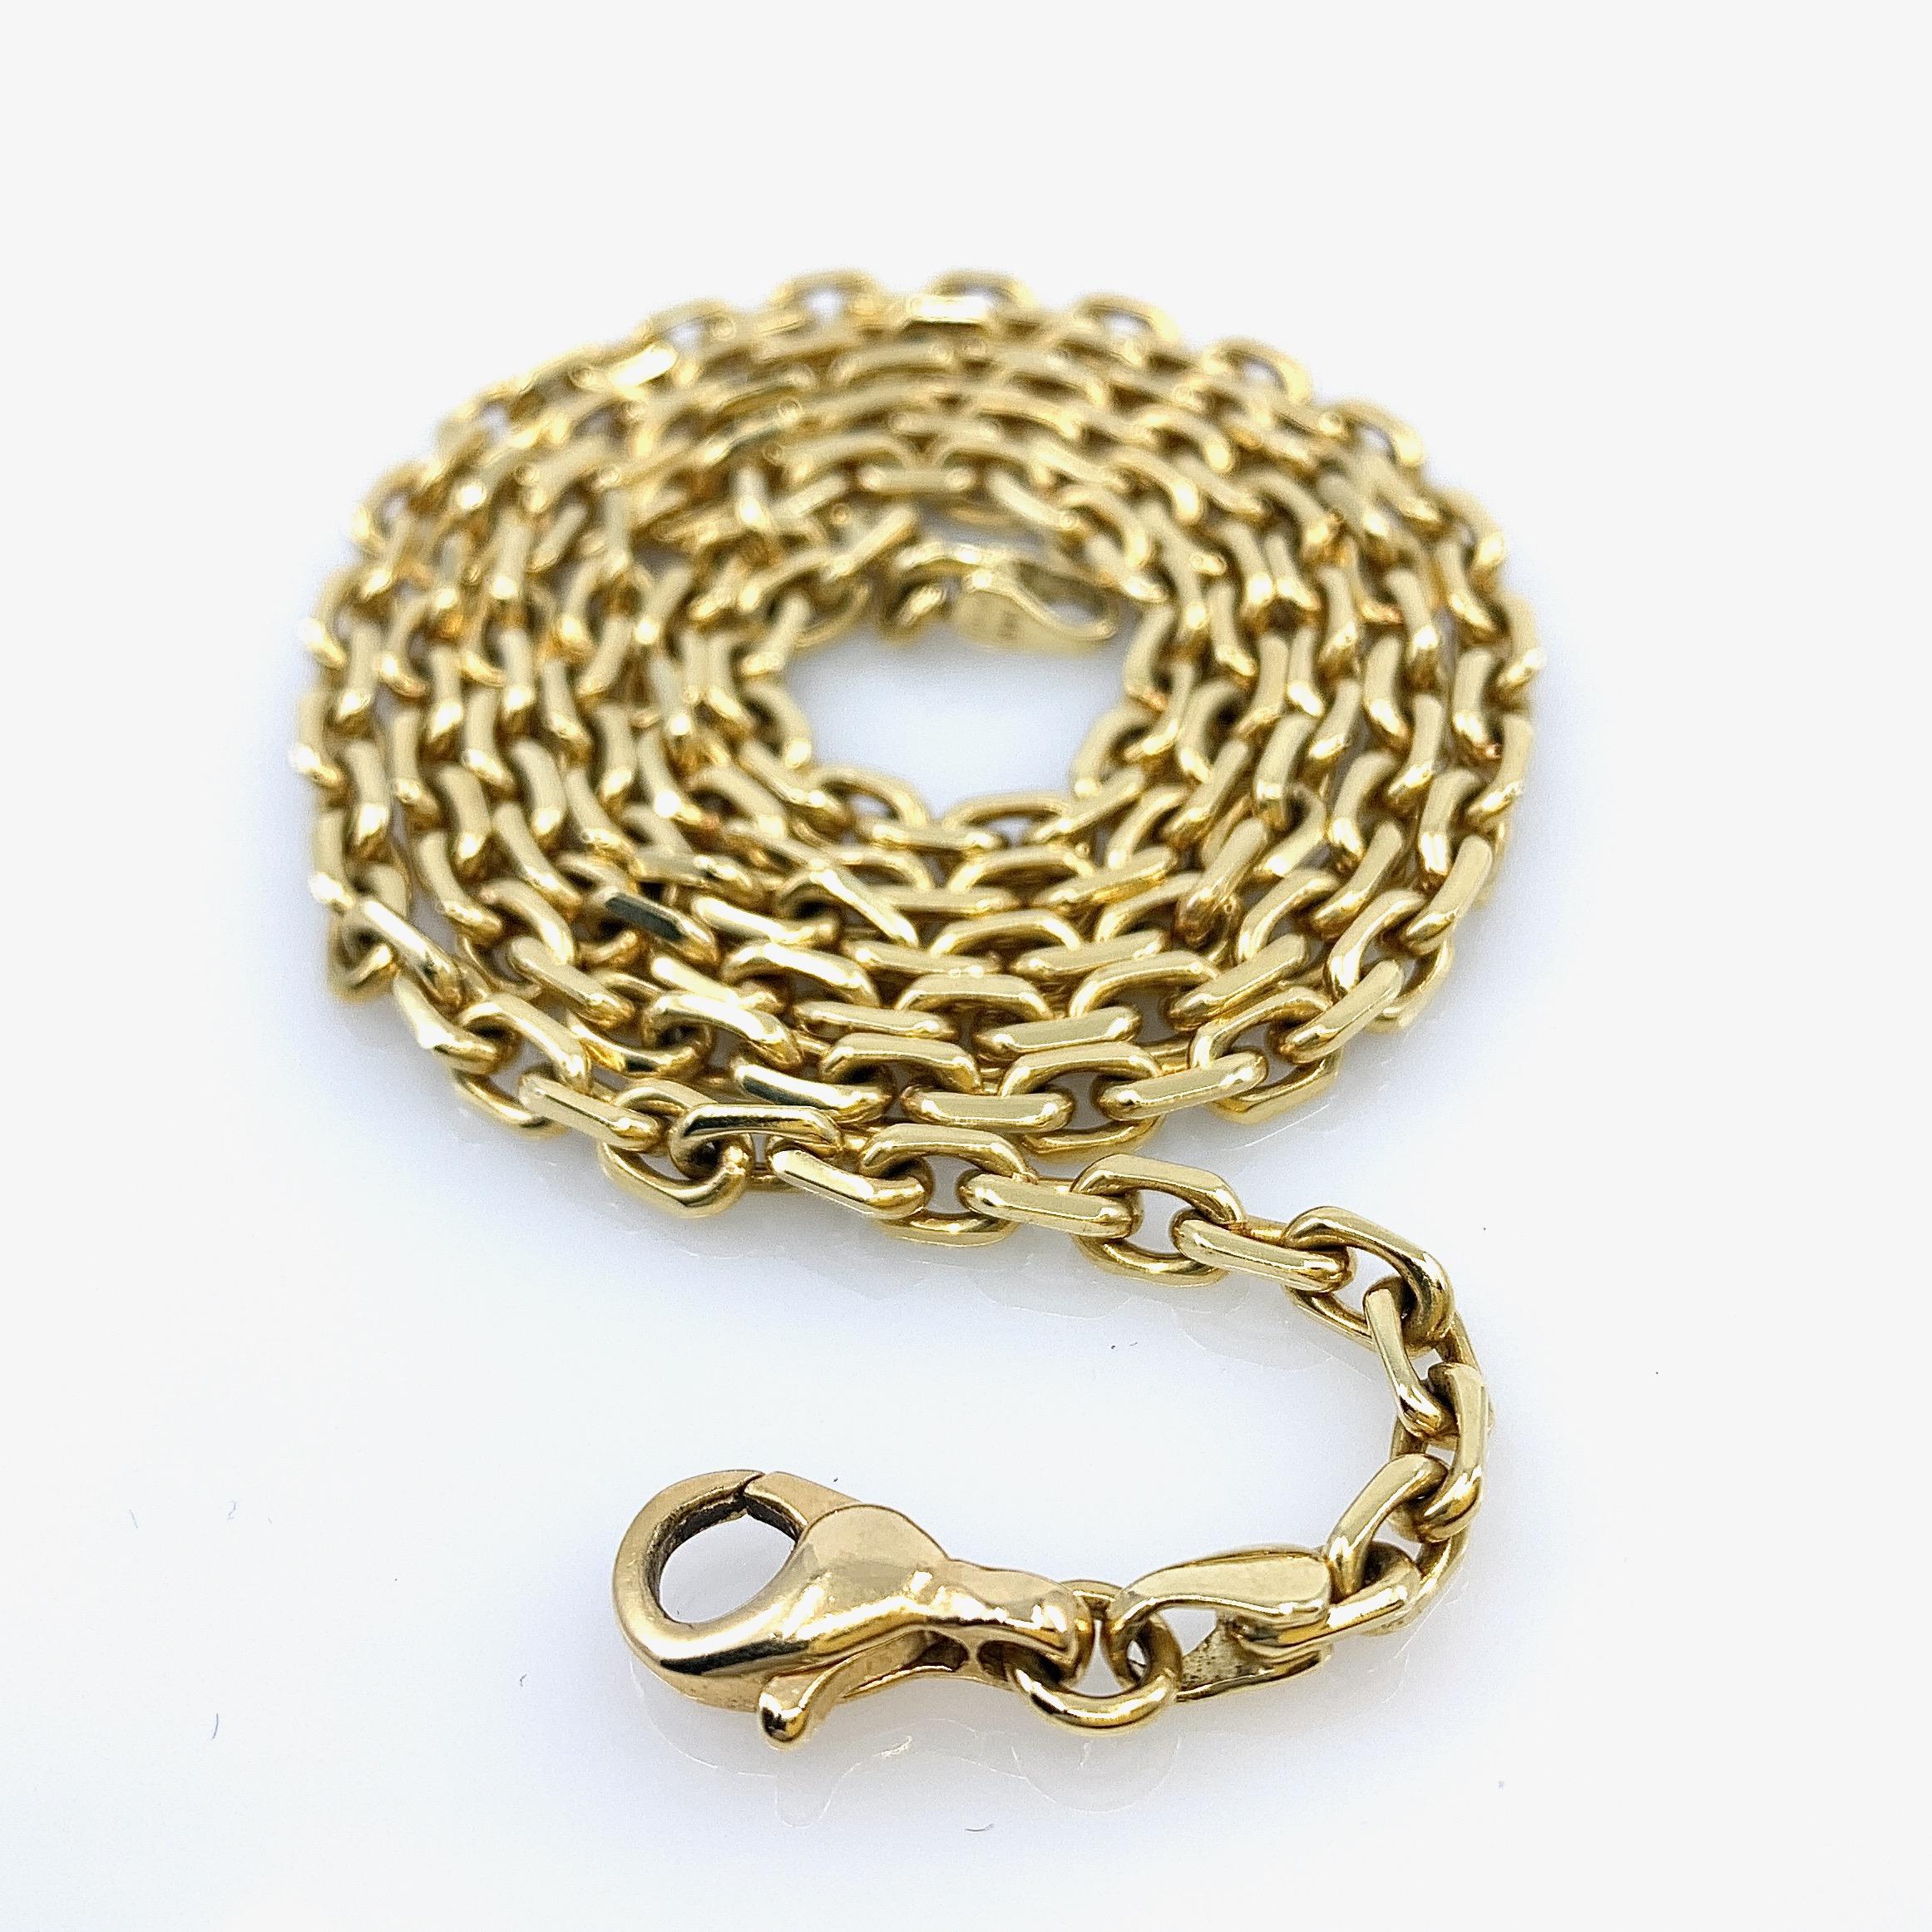 Your must-have chain, whether for layering, for pendants or for wearing alone, in a commanding 24